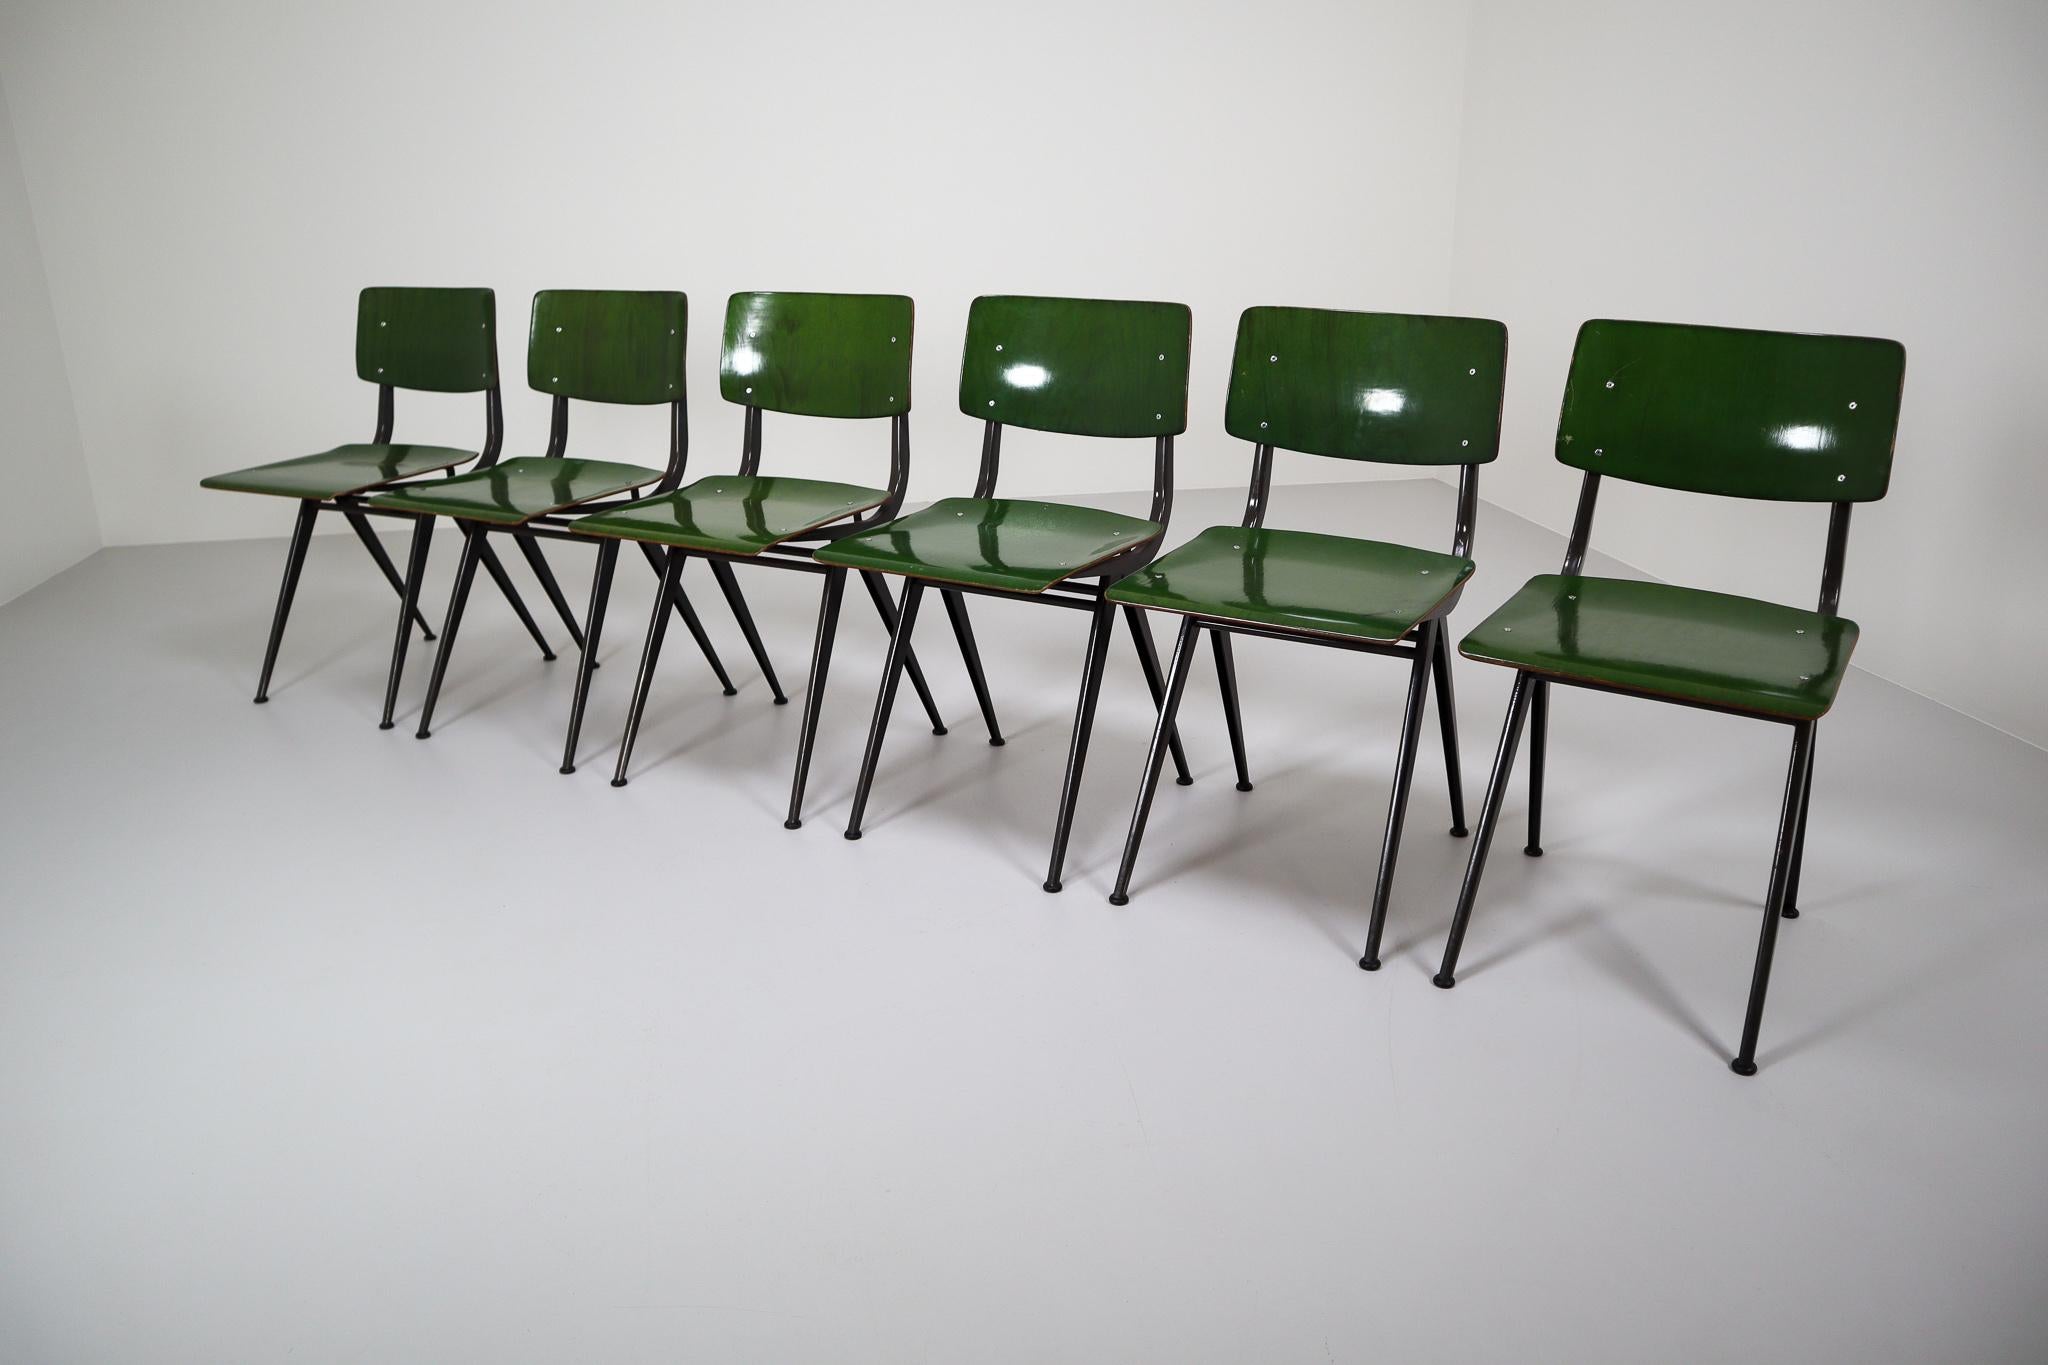 Six Compass Shaped Industrial Chairs by Marko Holland 1960s in Green Patina 1